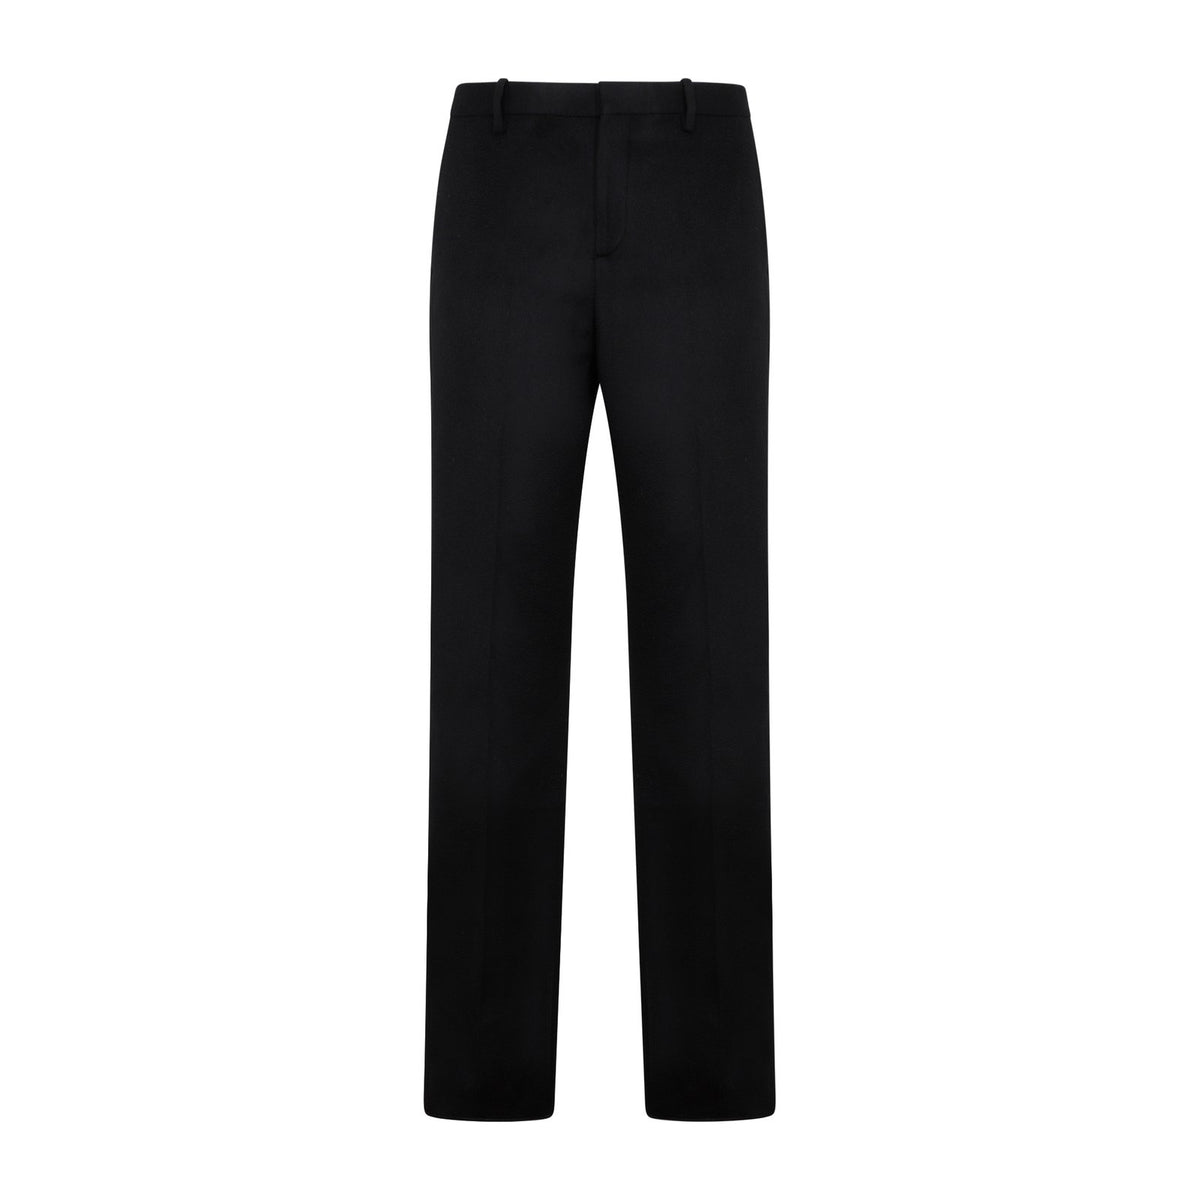 Off-White Classic Slim-Fit Pants